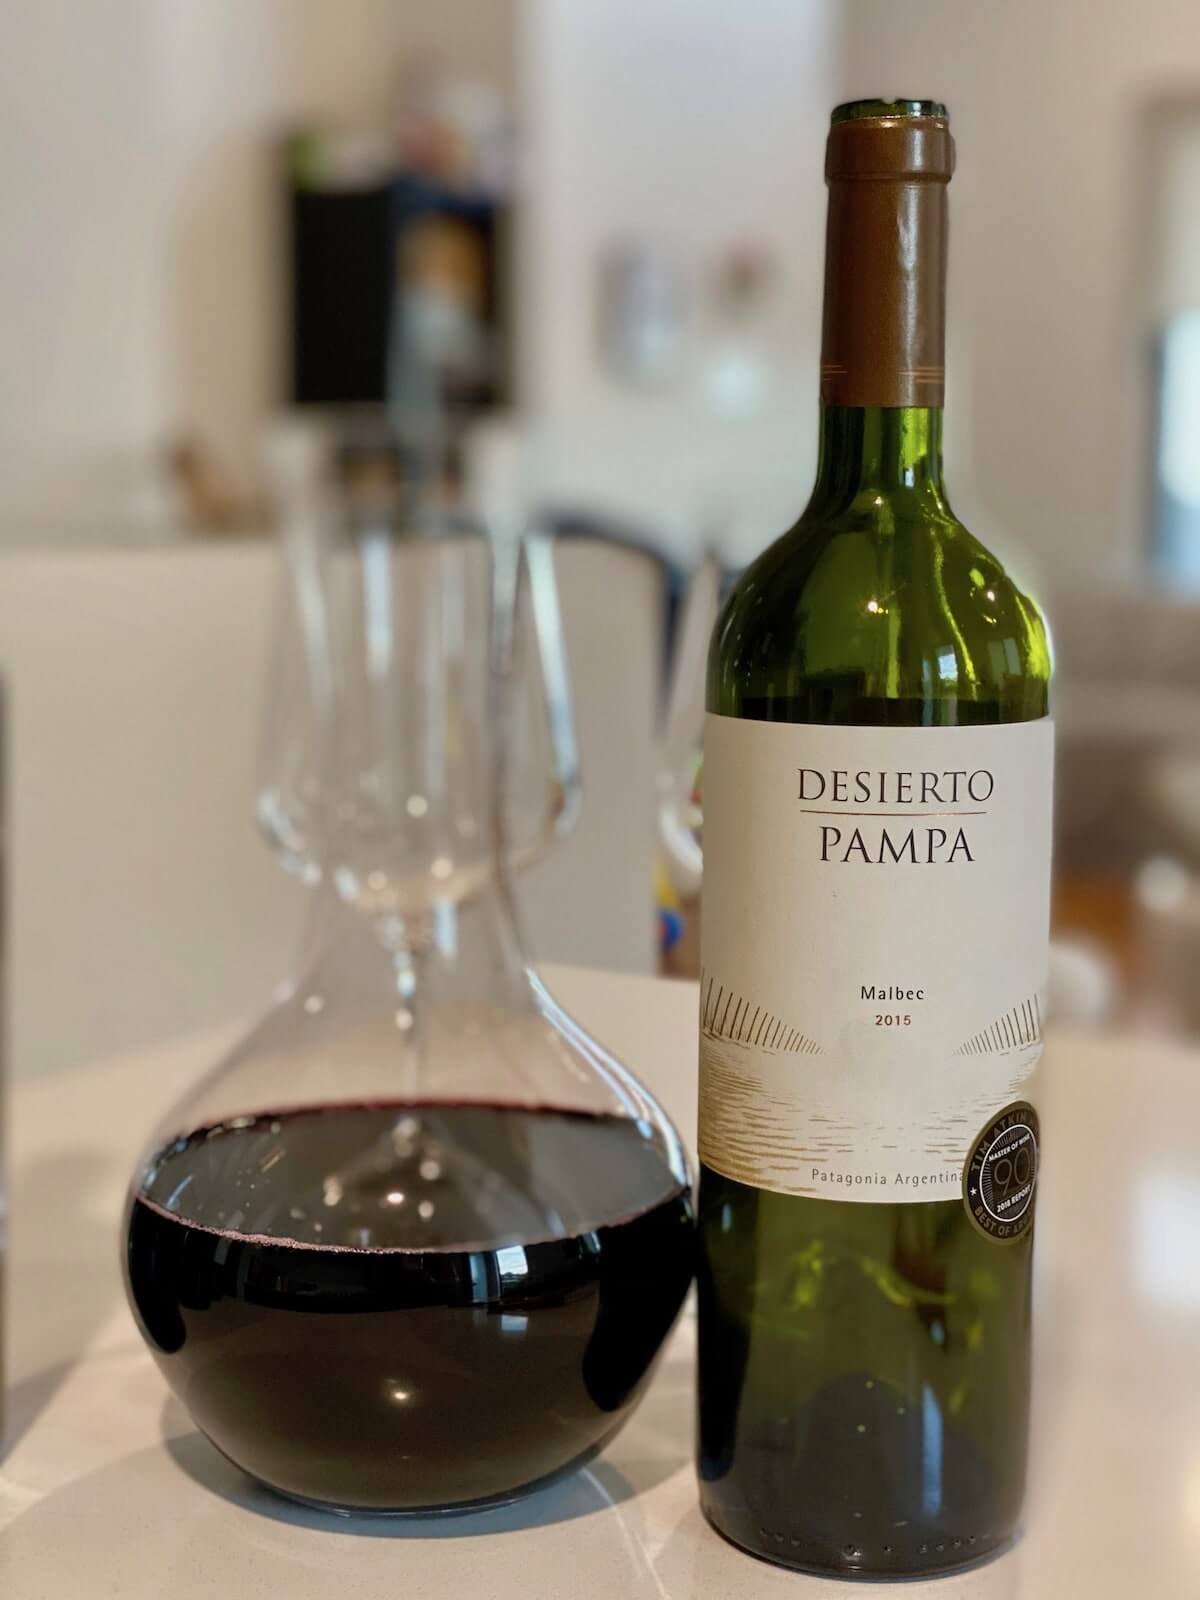 Desierto Pampa 2015 Malbec and red wine decanter